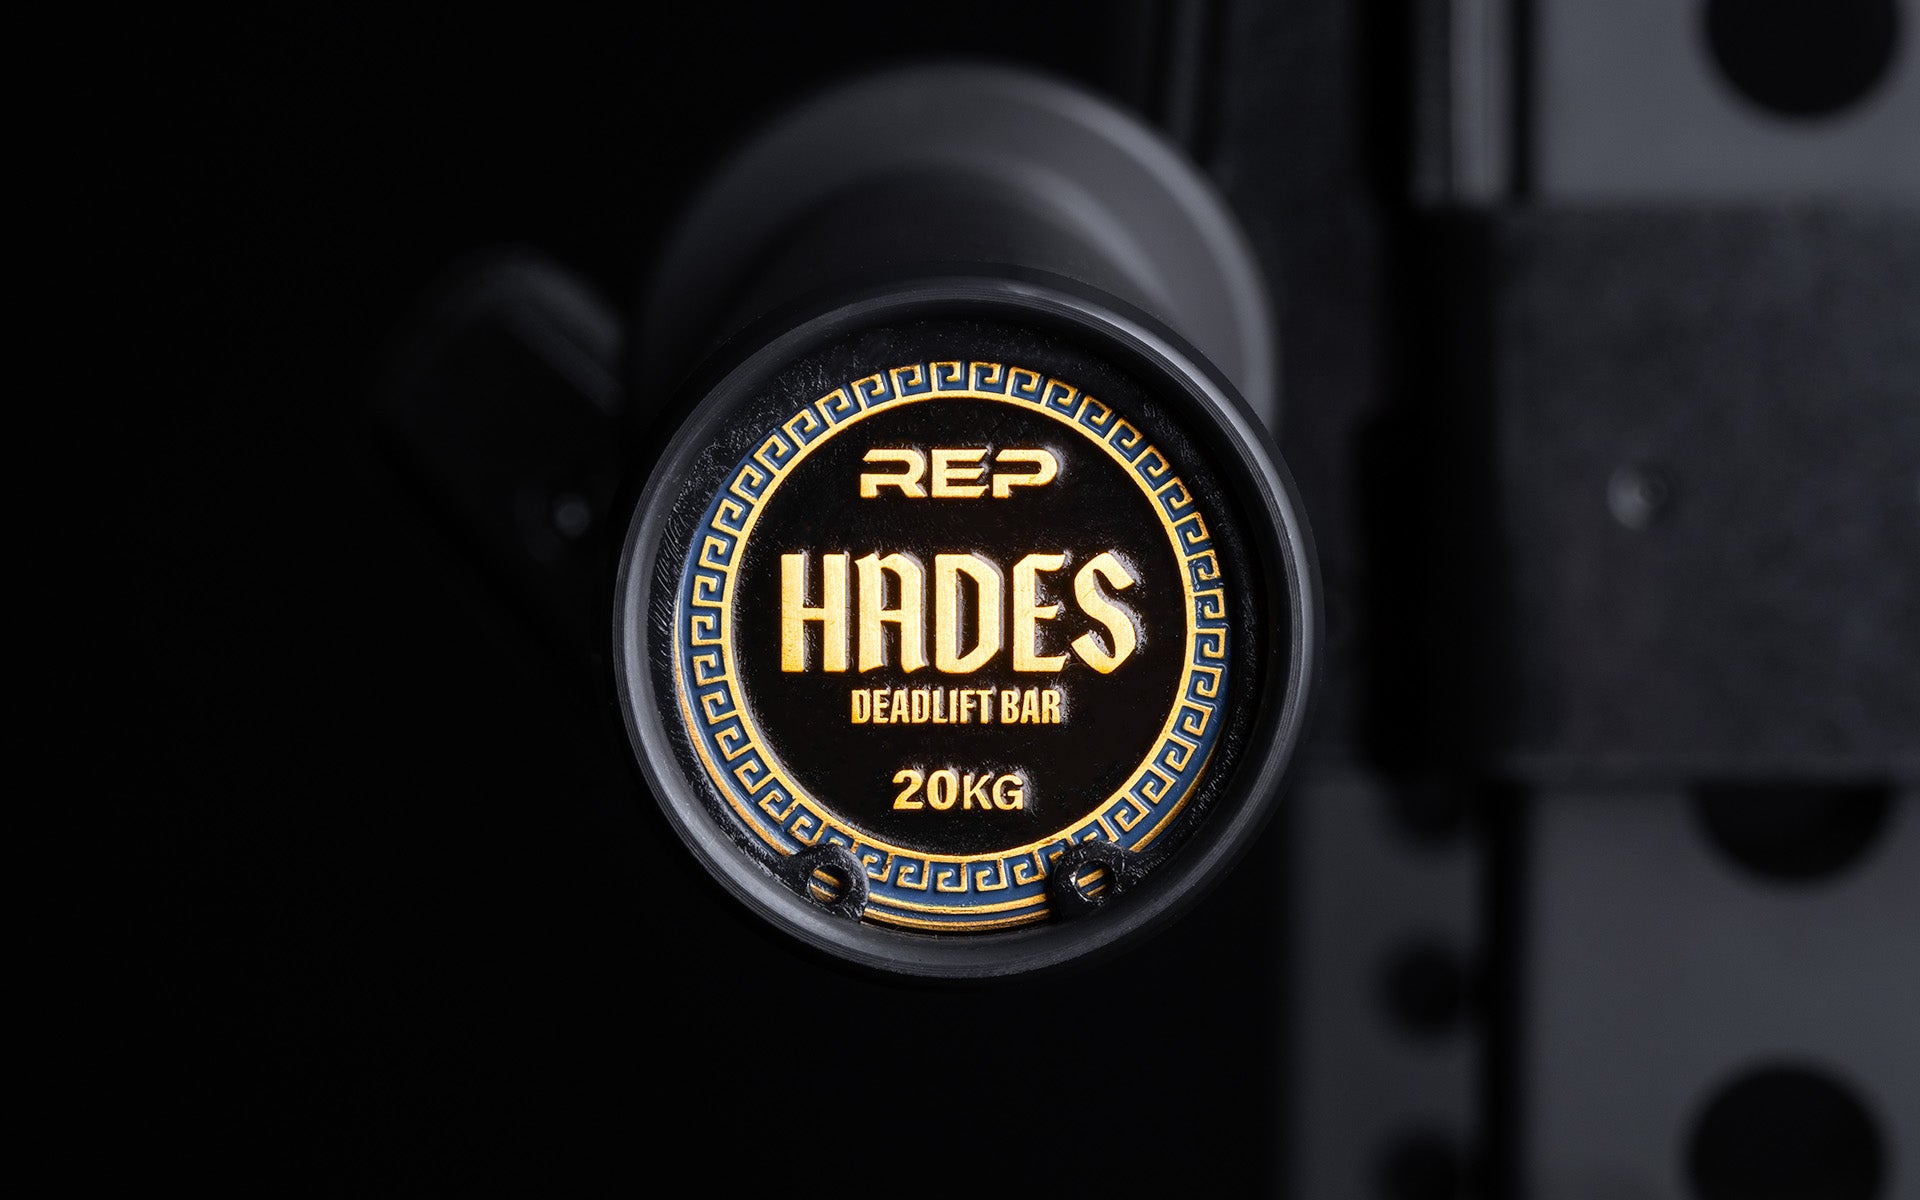 Close-up view of the uniquely designed metal endcap of a racked REP Hades Deadlift Bar.